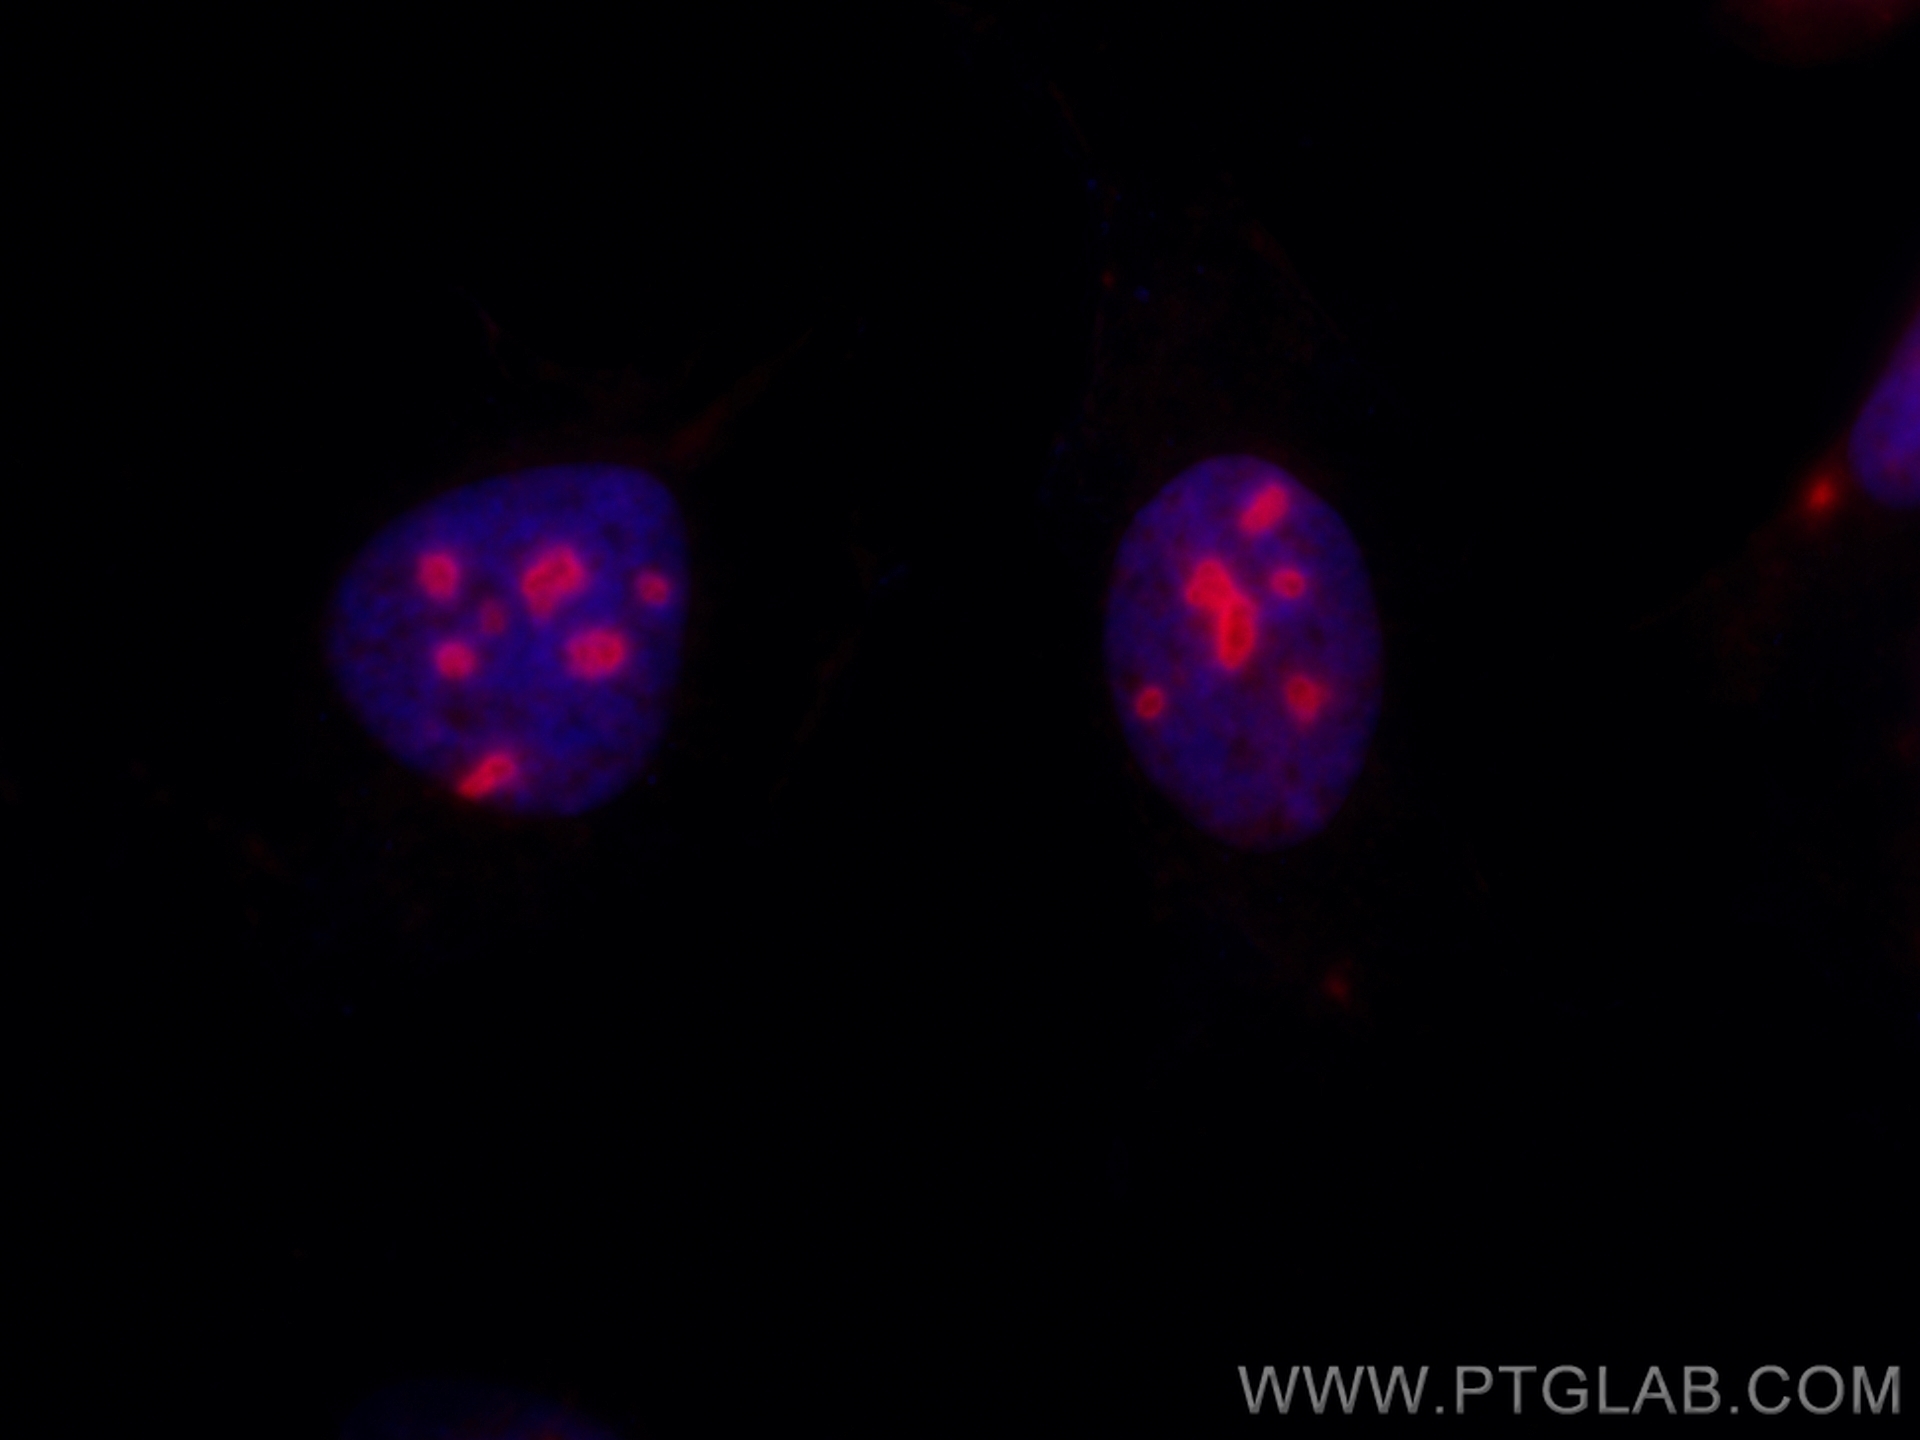 Immunofluorescence of HeLa: PFA-fixed HeLa cells were stained with anti-GNL3 antibody (67169-1-Ig) labeled with FlexAble HRP Antibody Labeling Kit for Mouse IgG2a (KFA045) and Tyramide-594 (red). Cell nuclei are in blue.